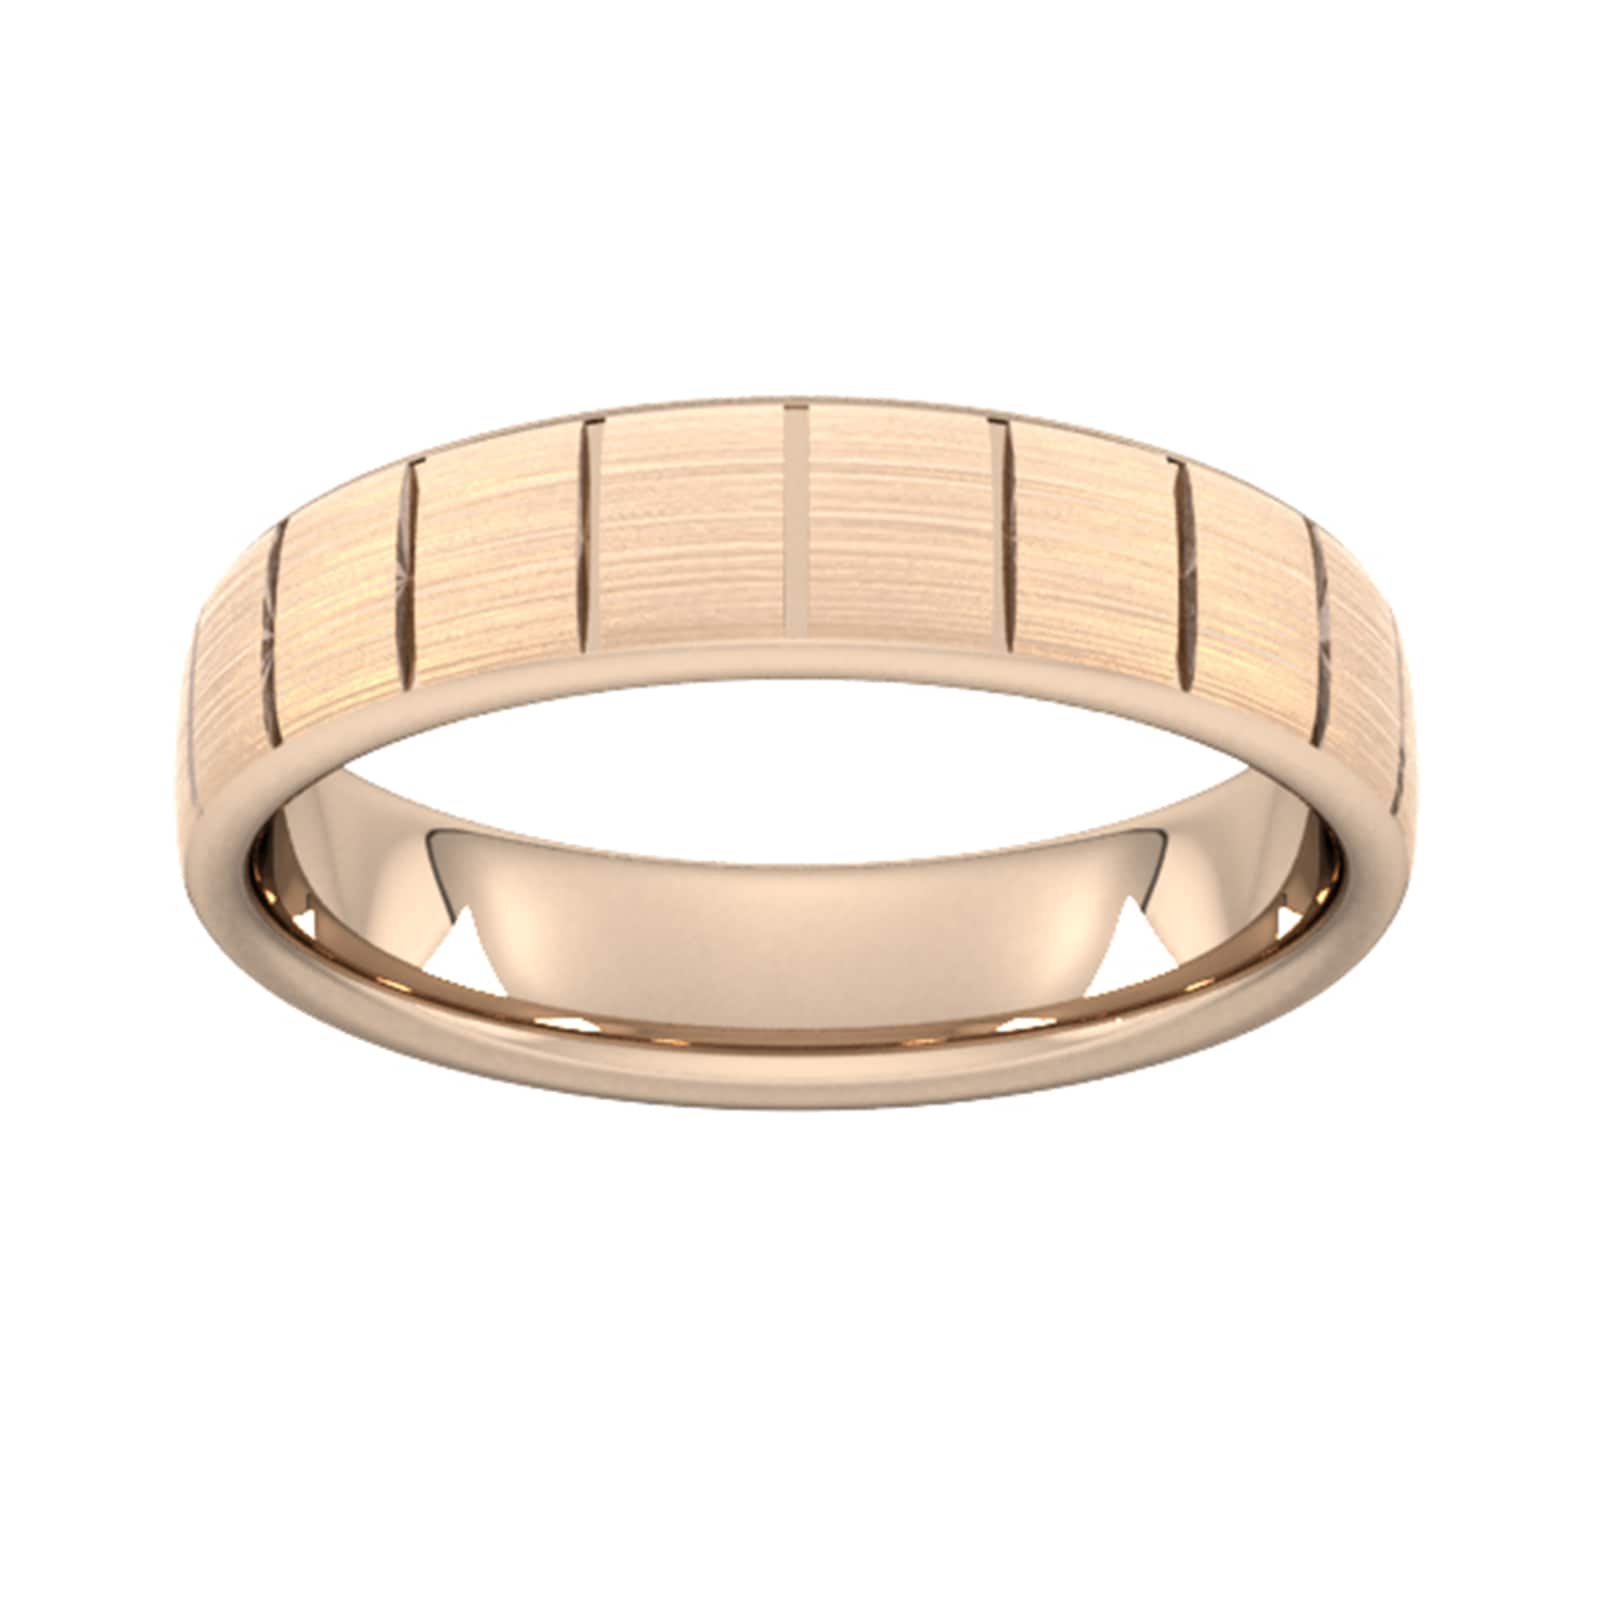 5mm D Shape Heavy Vertical Lines Wedding Ring In 18 Carat Rose Gold - Ring Size K